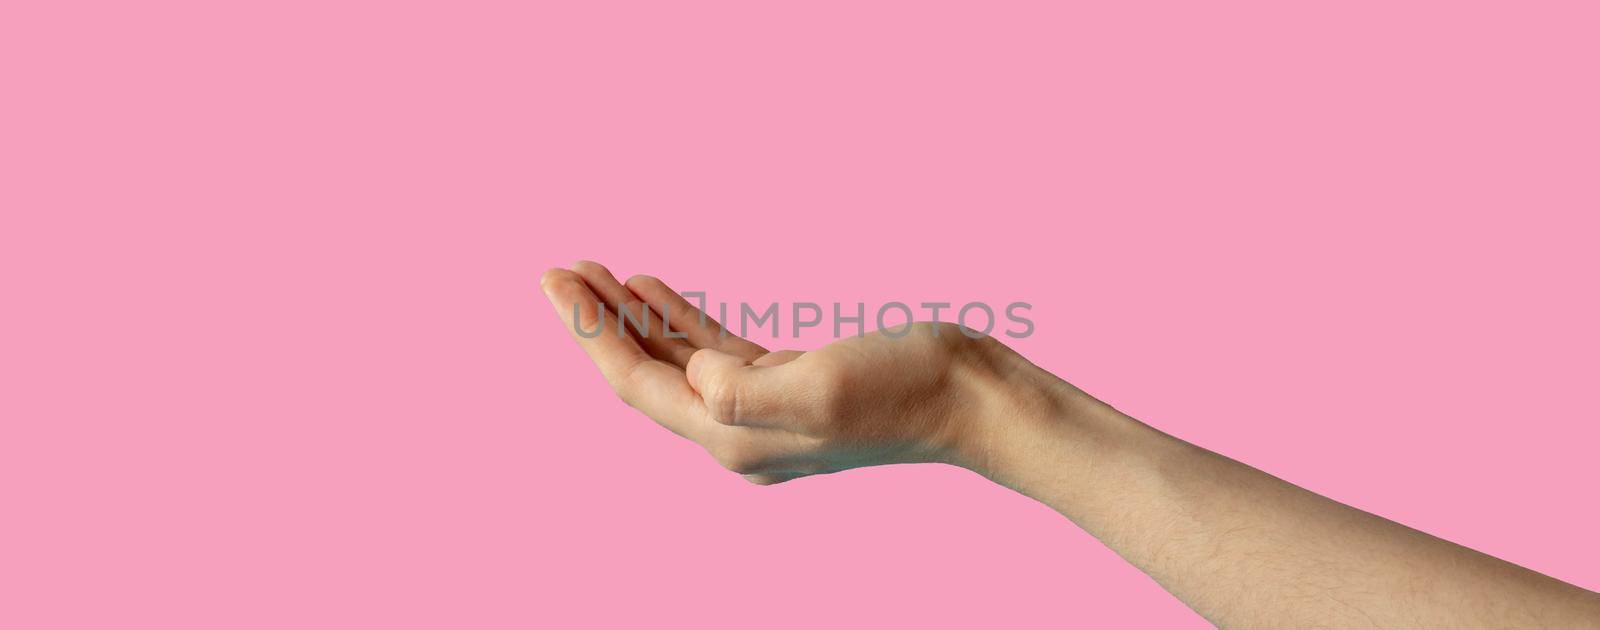 The hand is extended palm up.The hand is open and ready to help or accept. A gesture highlighted on a pink background with a clipping outline by lapushka62